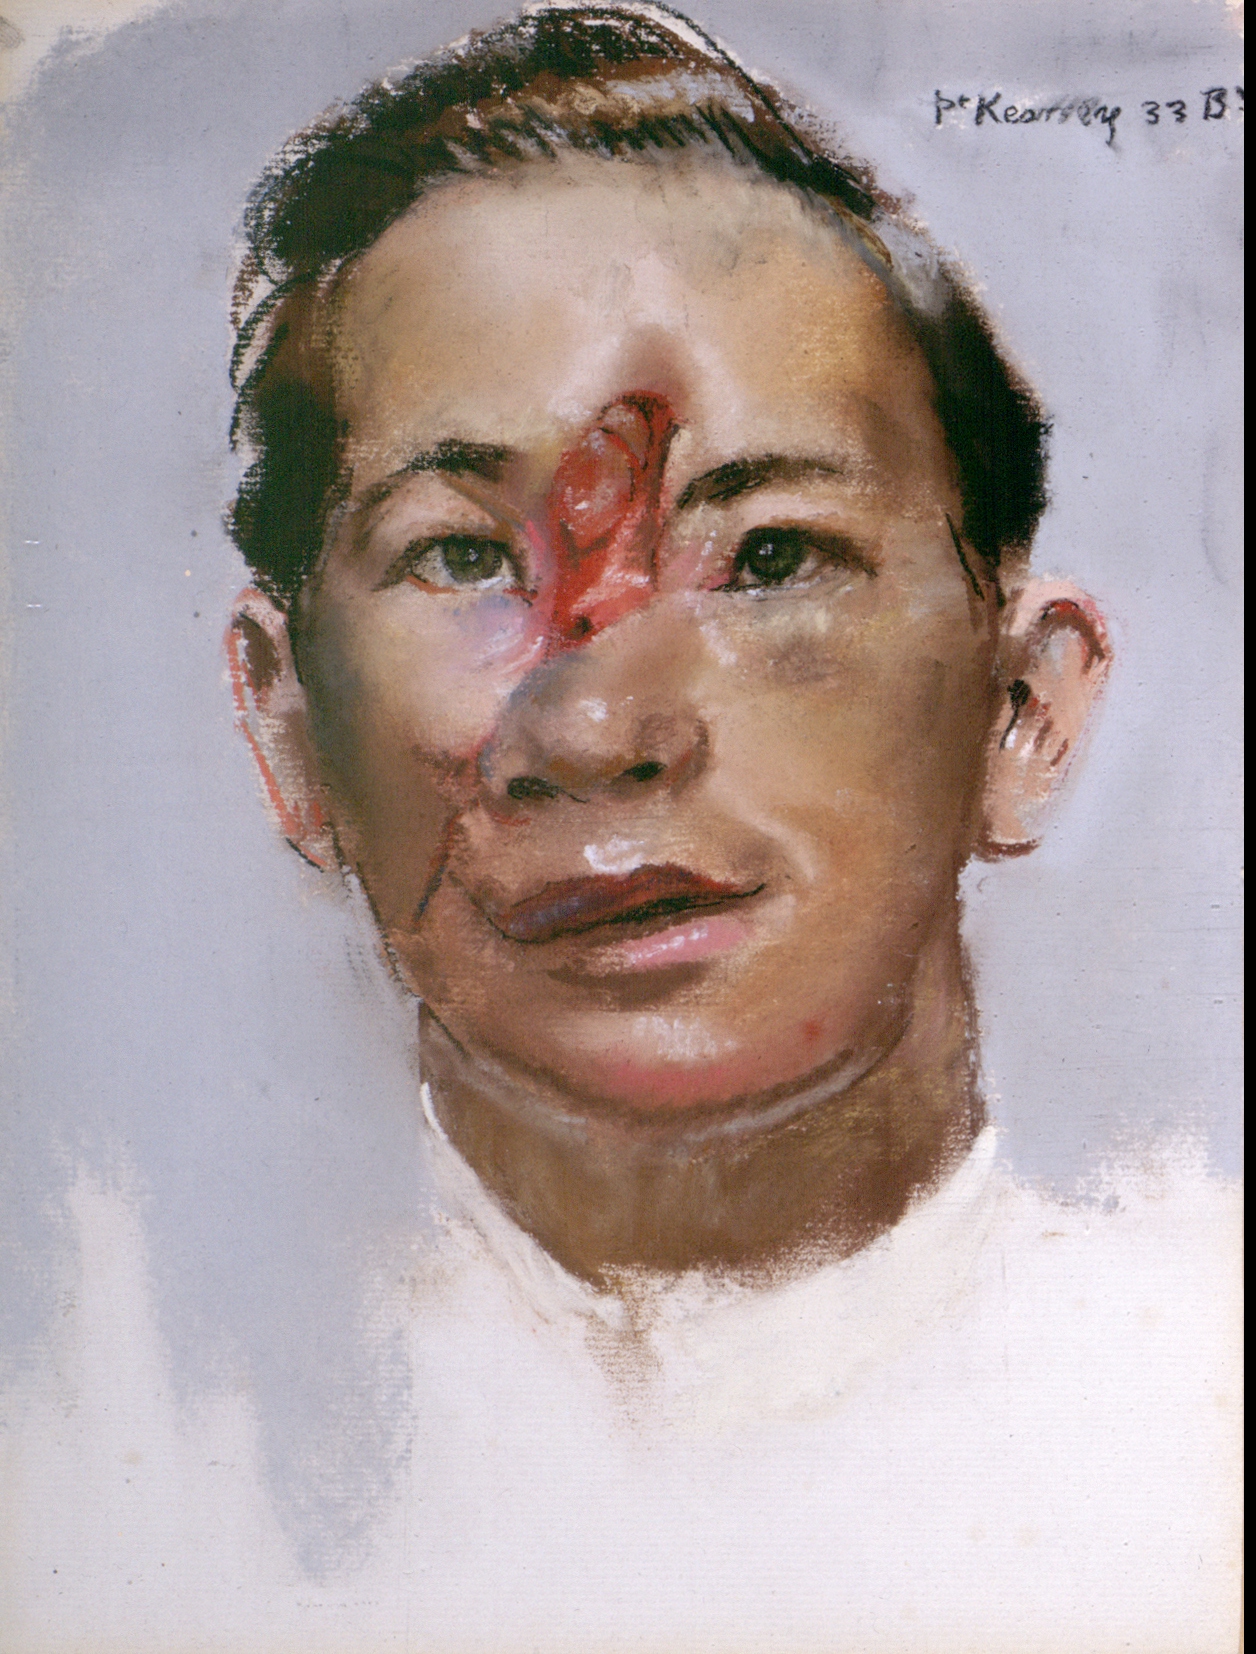 Watercolour painting of a man's face with a large injury between the eyes and across the right cheek.